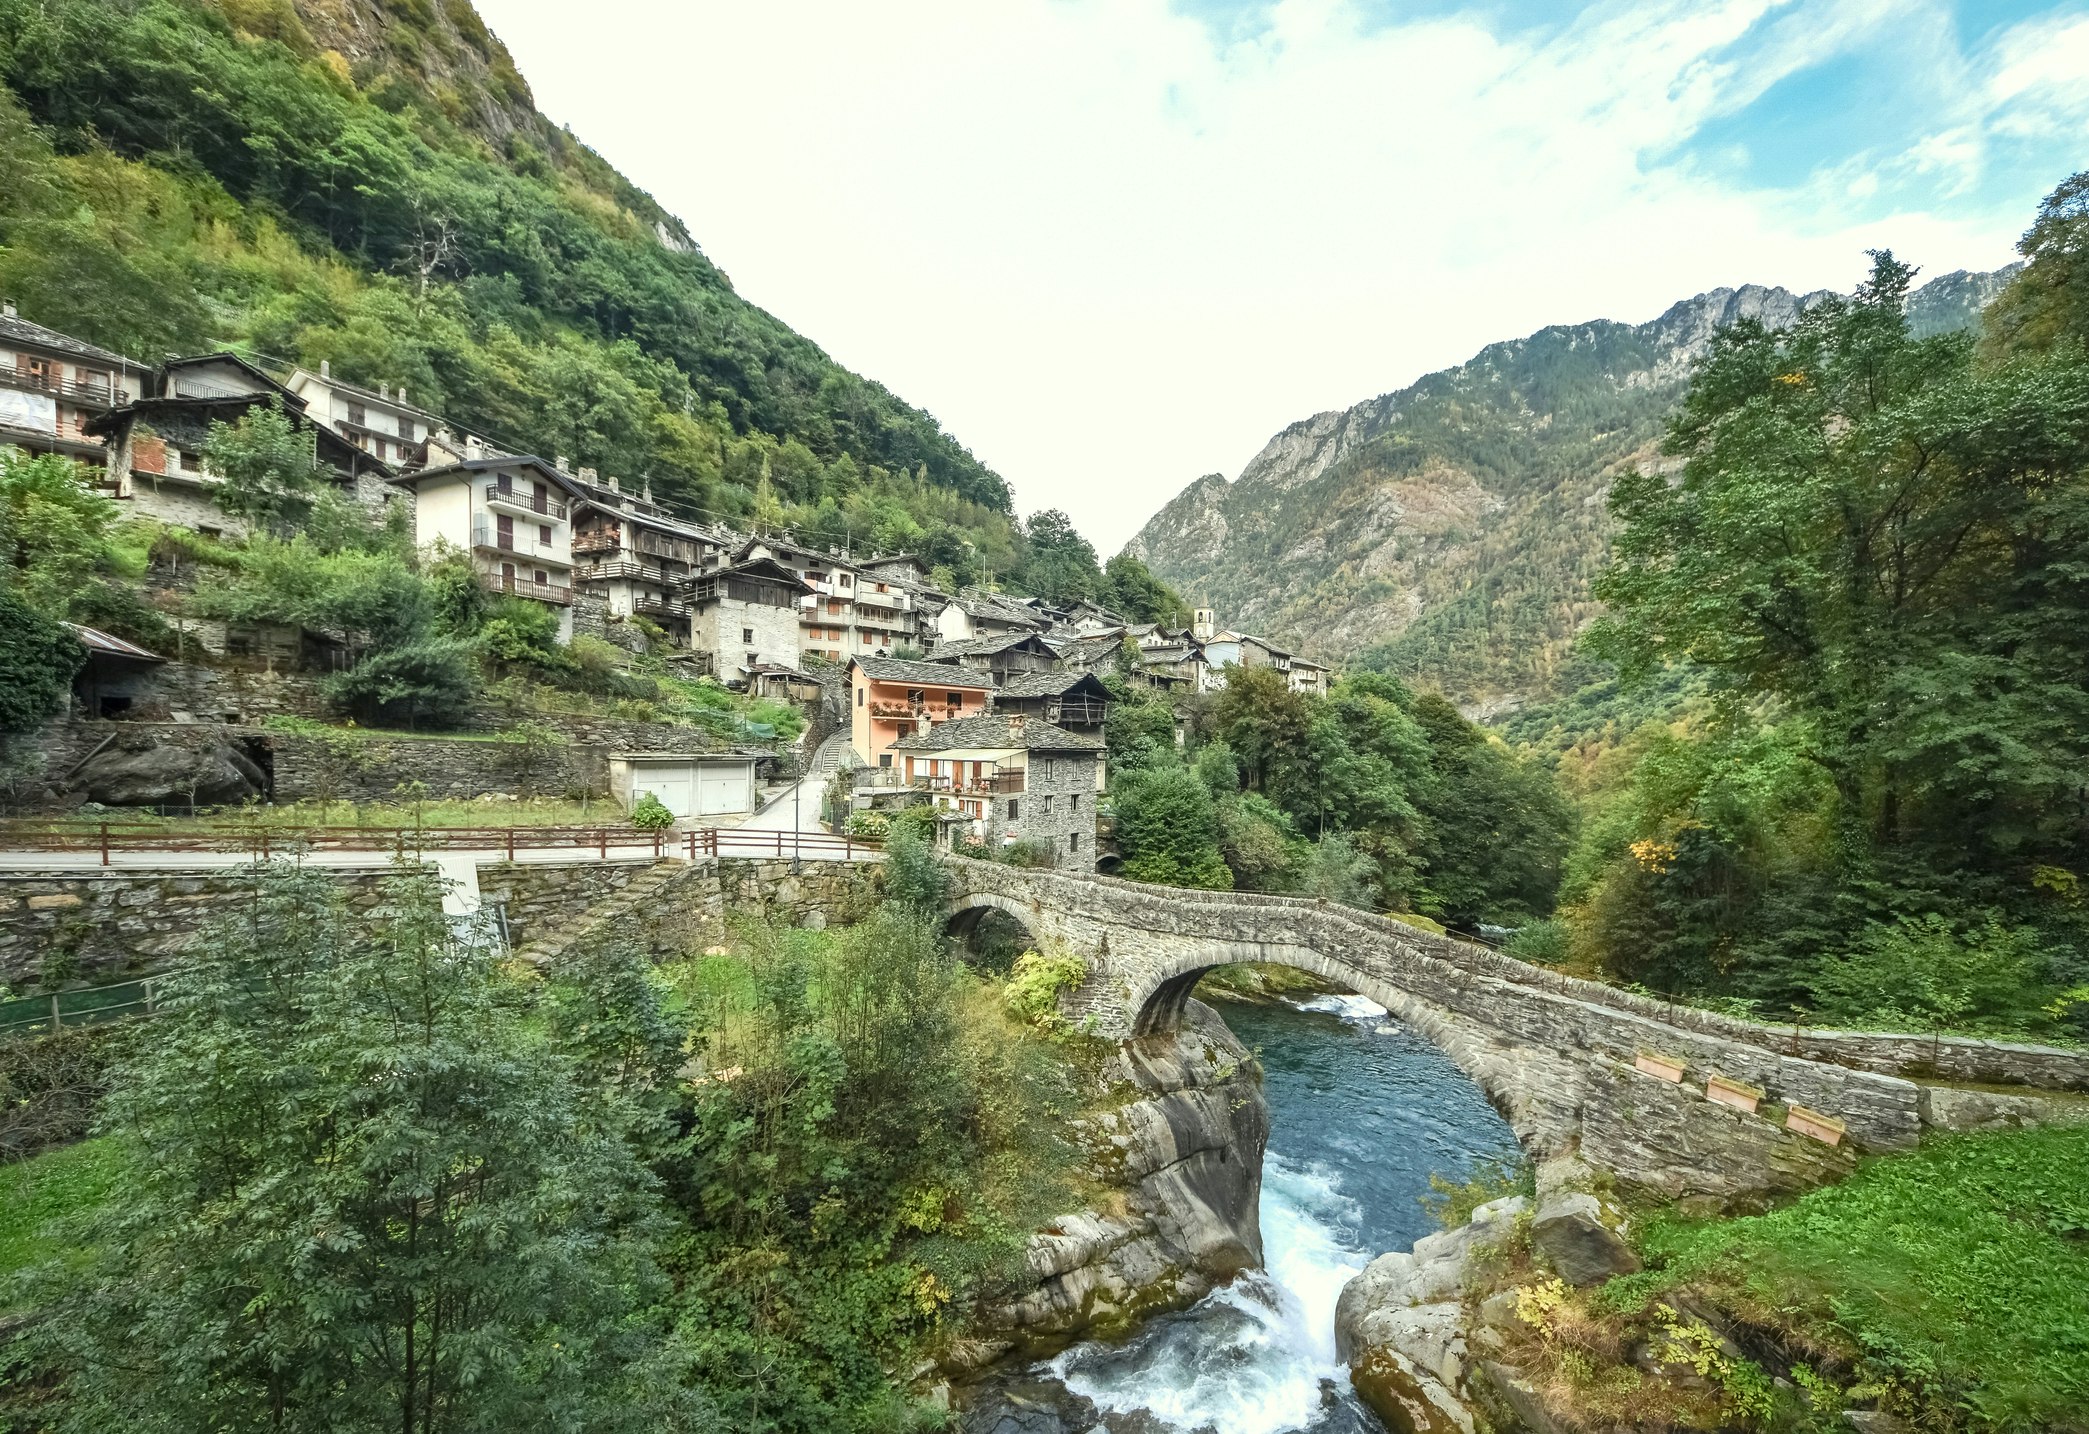 Alpine village with green mountains, wooden chalets and an old medieval bridge across the river